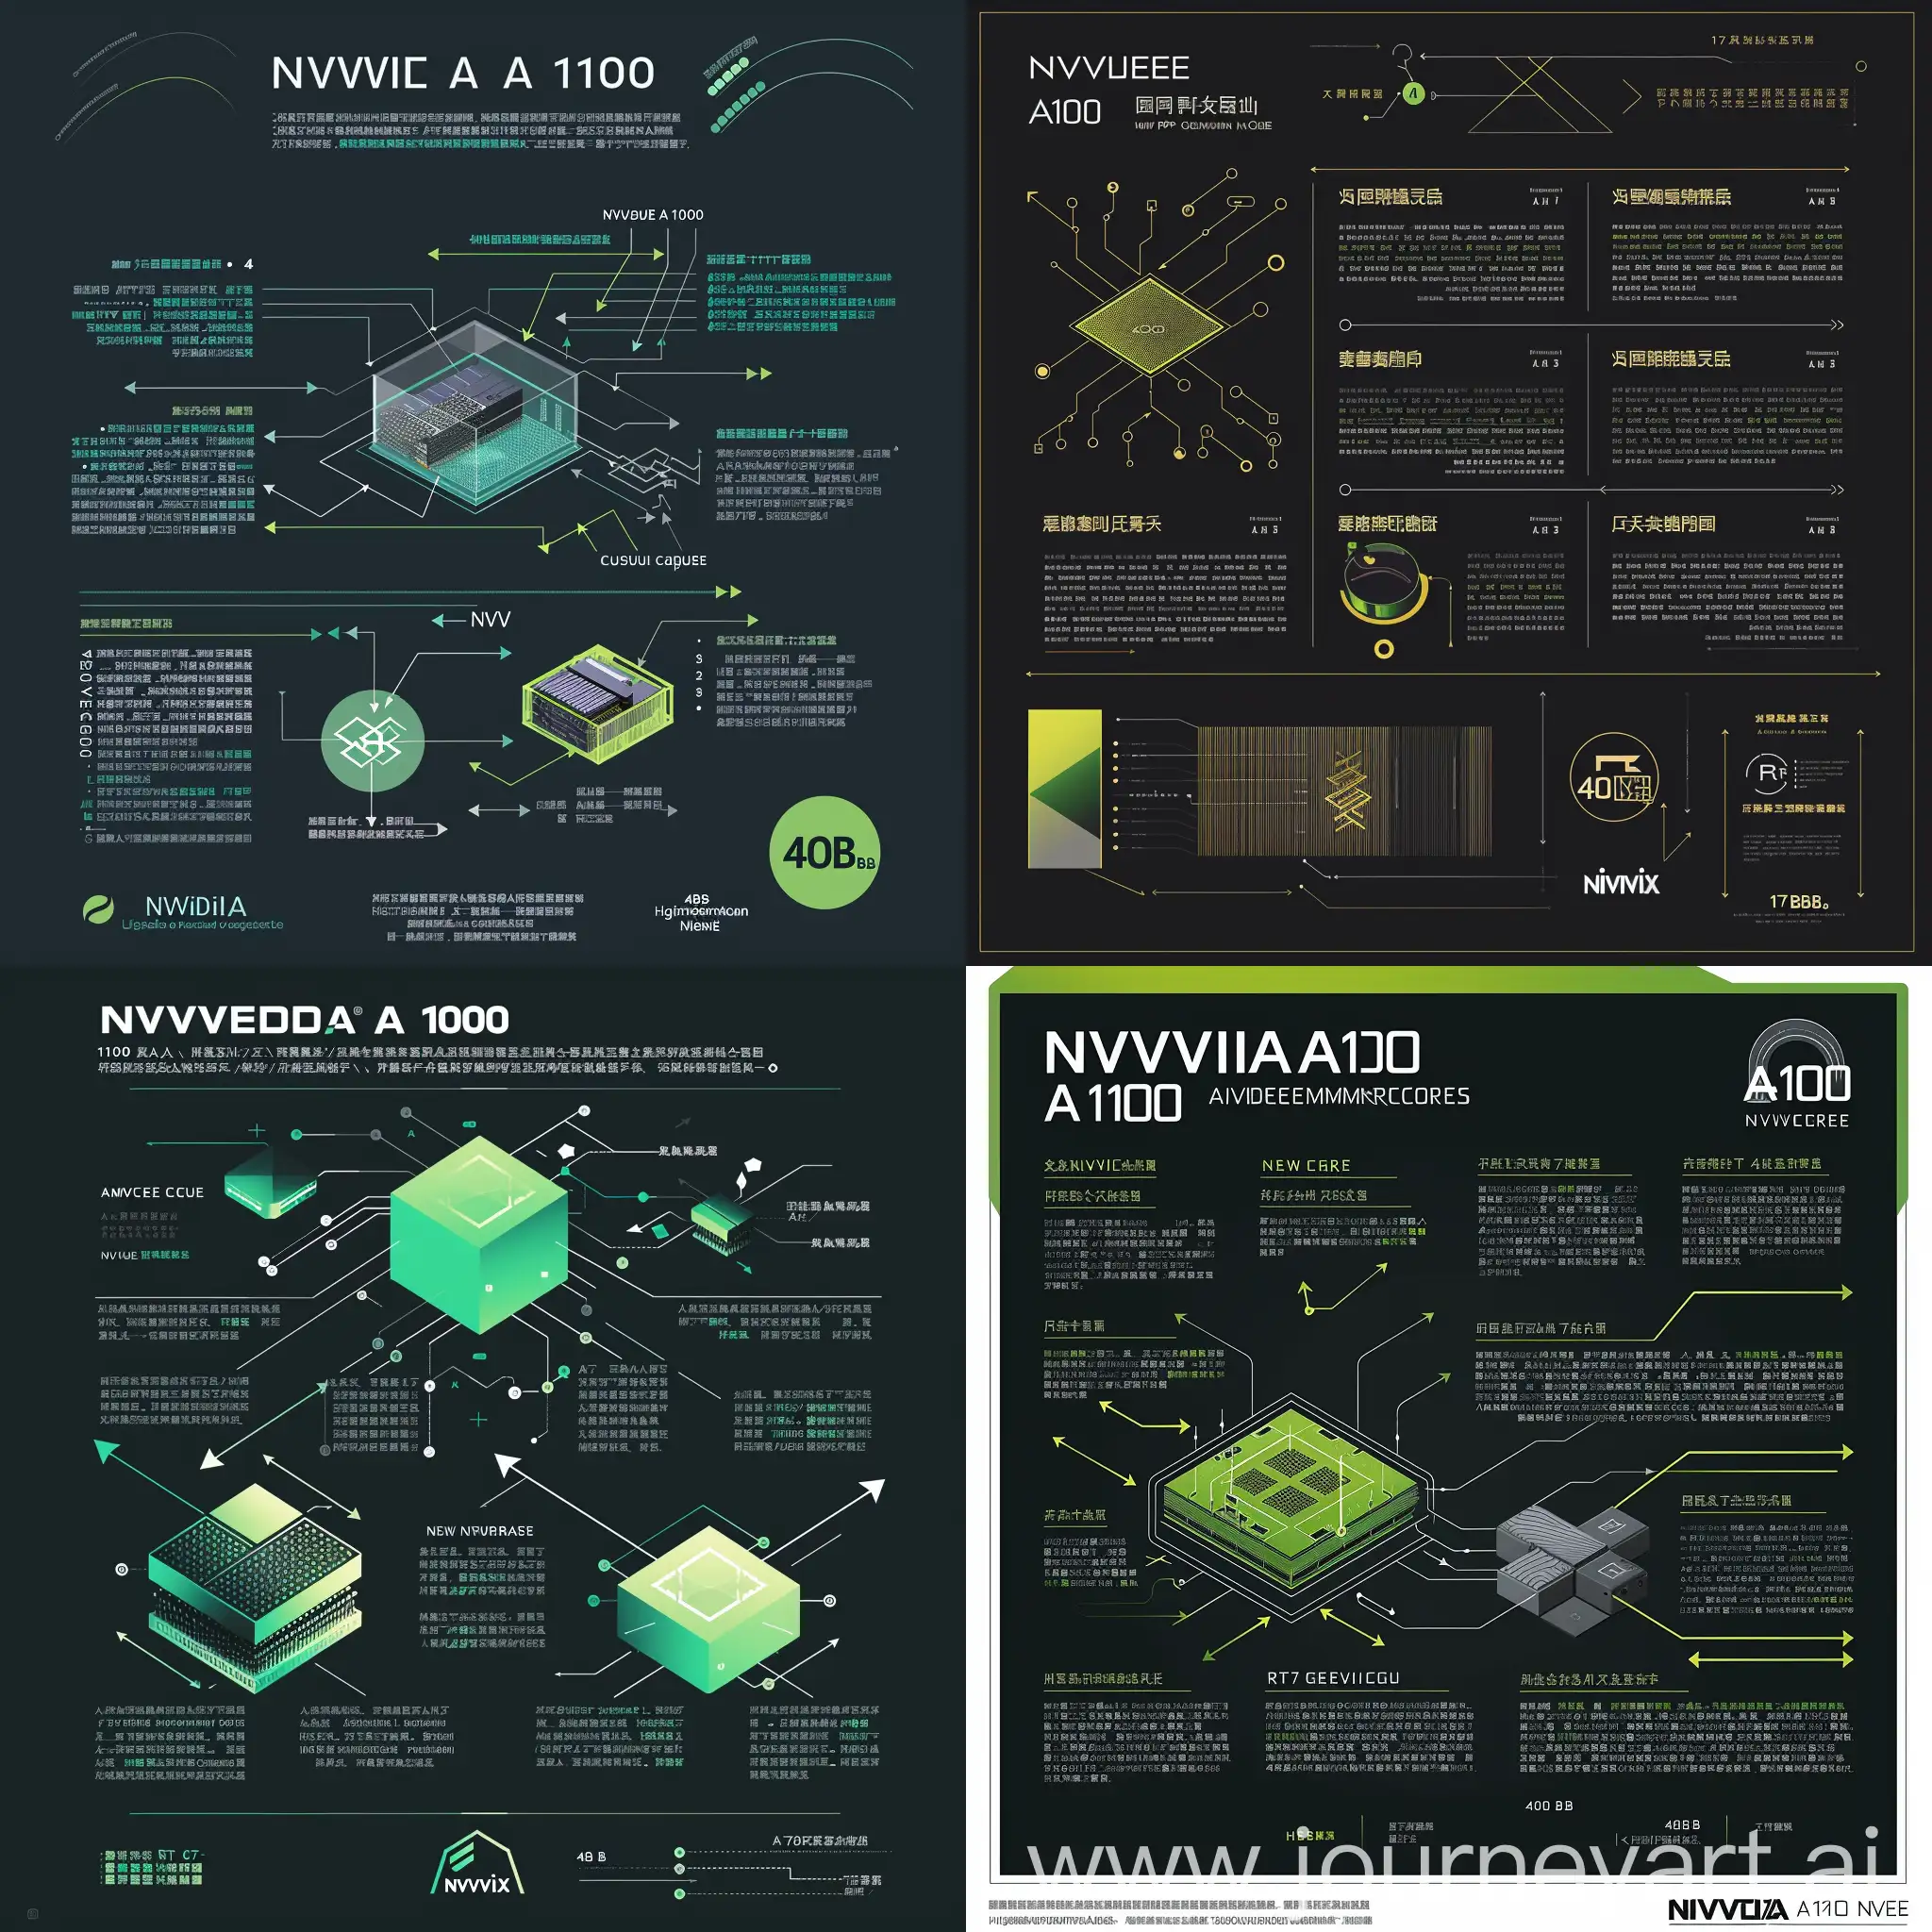  Nvidia A100 Architecture This infographic showcases the key components of the Nvidia A100 architecture.  Sections:  Top Left: Title - "Nvidia A100 GPU Architecture" Center Left: Block: Ampere Streaming Multiprocessor (SM) Text inside: "的核心 (Héxīn) - Core" (Core in Chinese) List surrounding the block: 128 FP32 CUDA Cores 4 Third-Generation Tensor Cores New RT Cores for Ray Tracing New In-Memory Computing Cache Center Right: Block: NVLink and PCIe Gen 4 Interconnects Text inside: "互连 (Hùlián) - Interconnection" (Interconnection in Chinese) Arrows depicting data flow between SMs and other components Bottom Left: Block: 40GB HBM2e Memory Text inside: "高速内存 (Gāosù nèncún) - High-Speed Memory" (High-Speed Memory in Chinese) Spec: 1.6 TB/s Bandwidth Bottom Right: Nvidia Logo